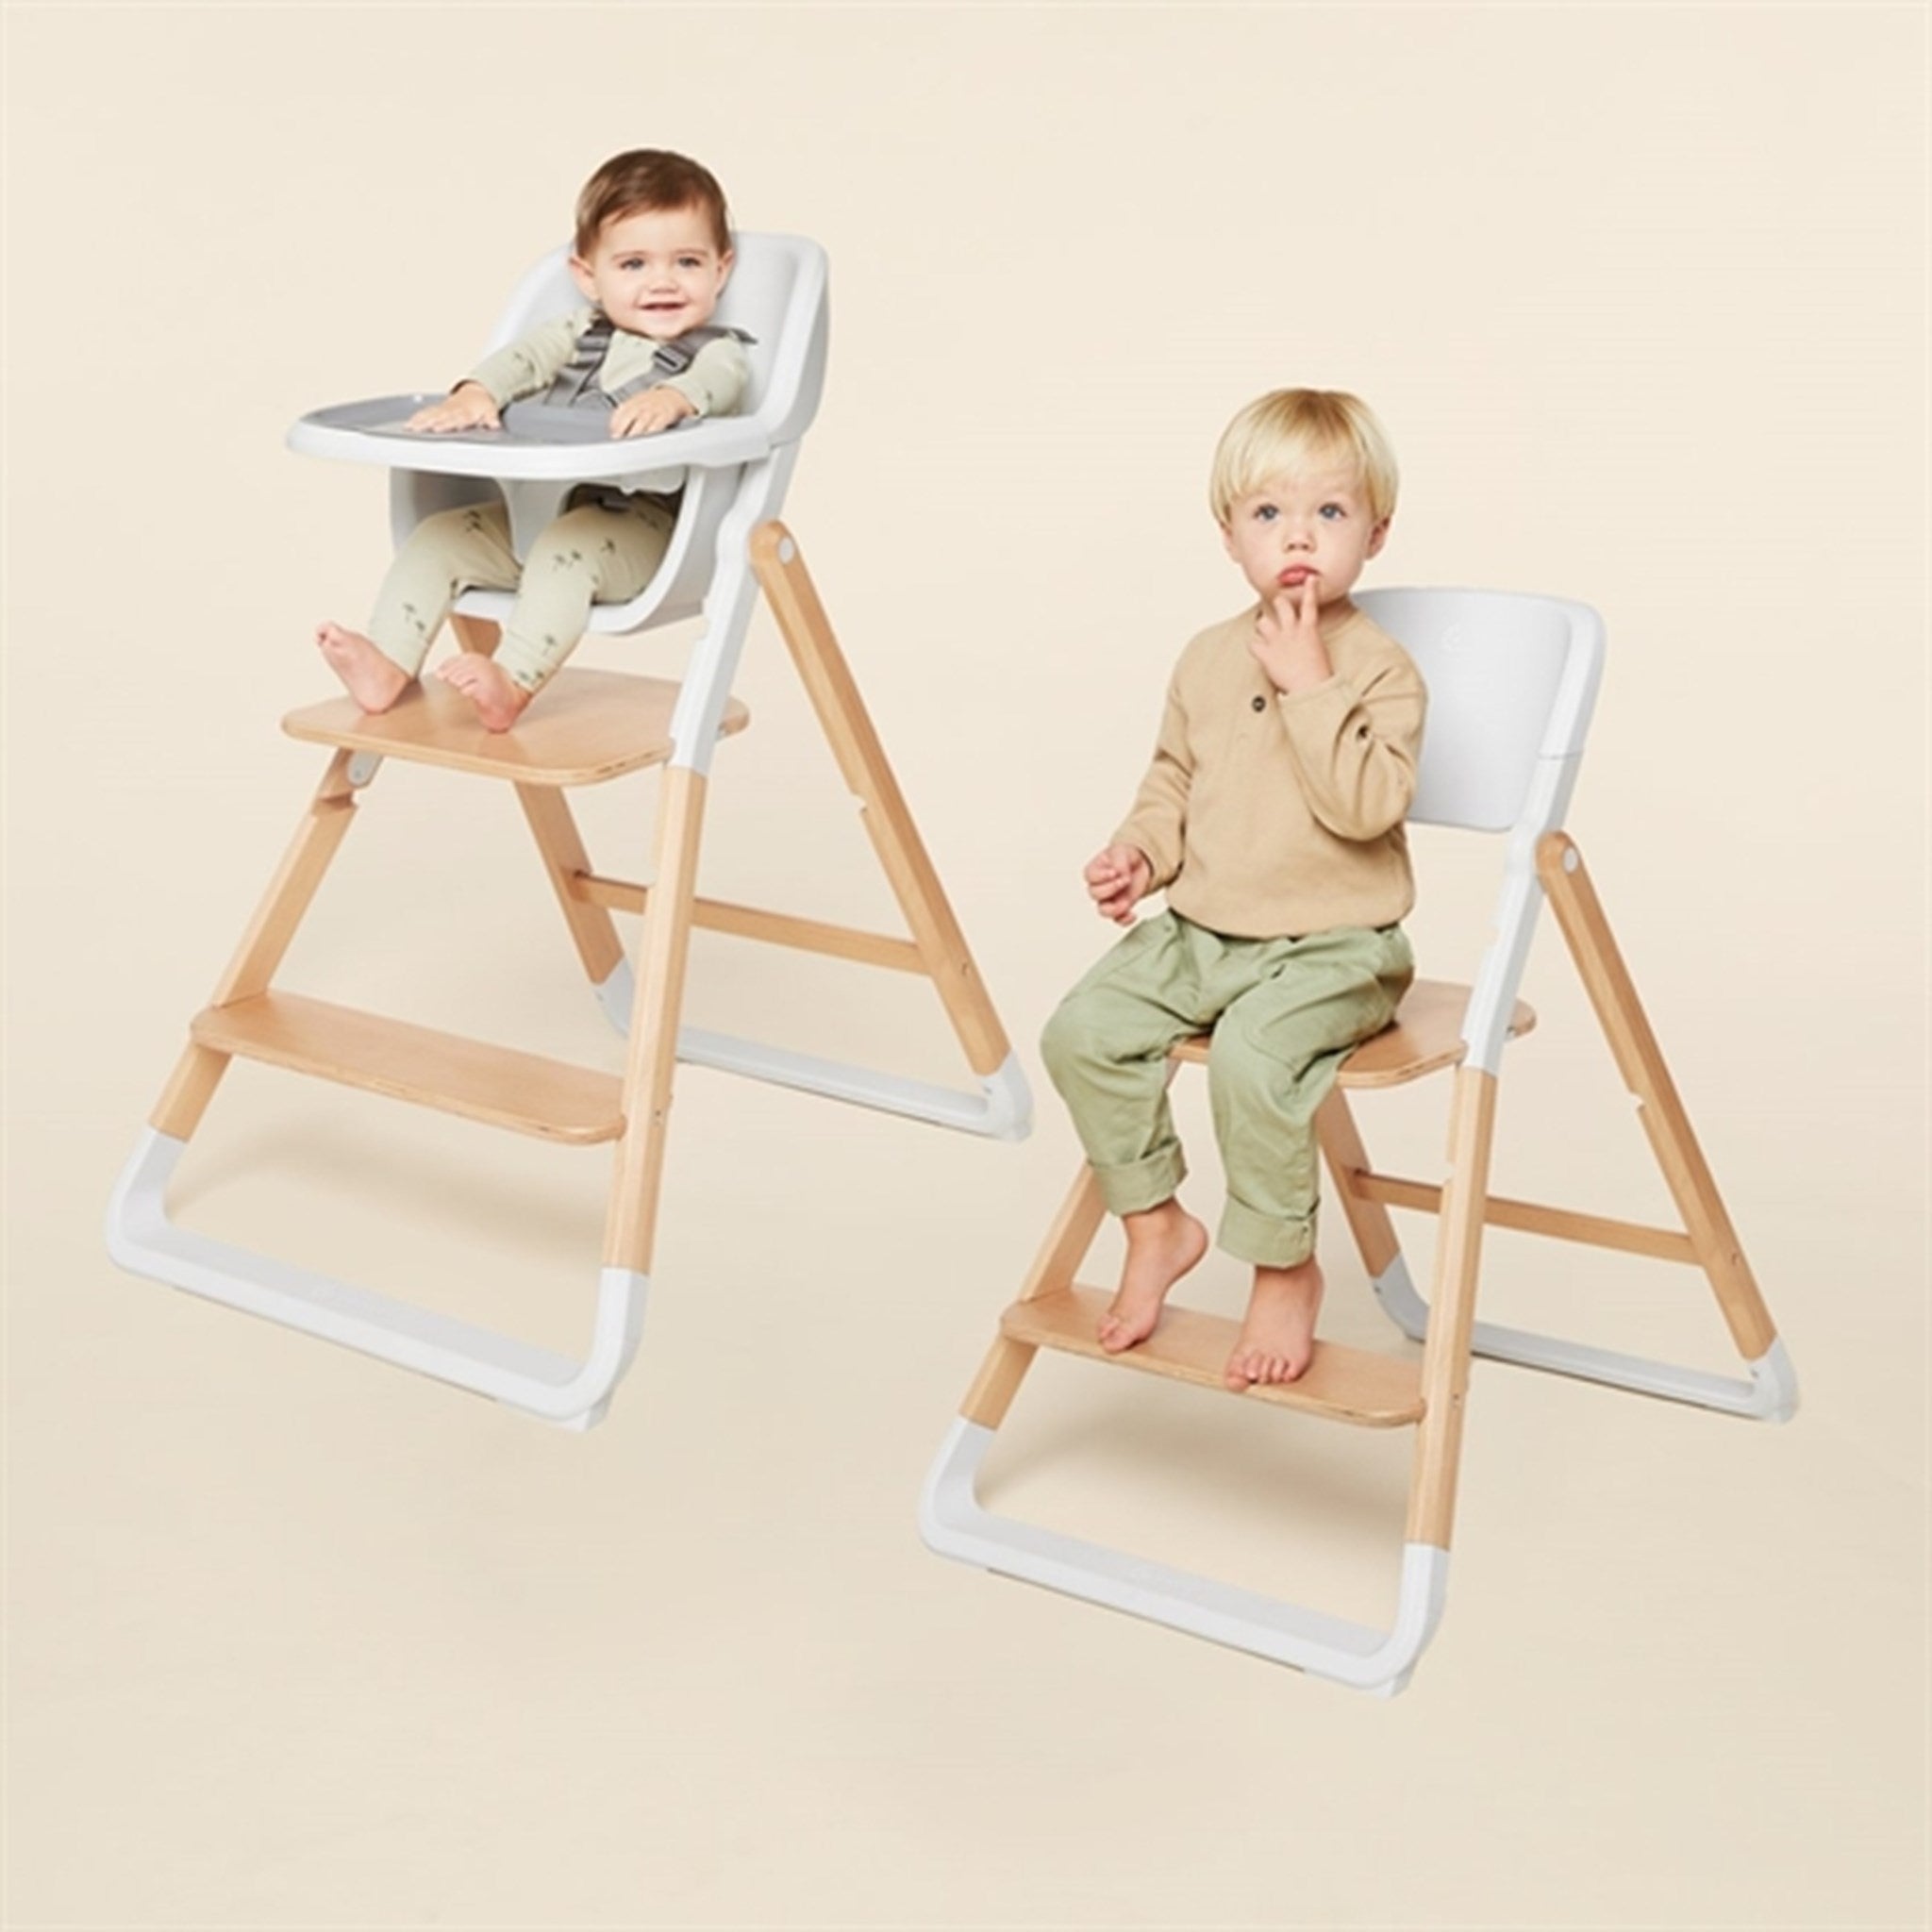 Ergobaby Evolve 2-in-1 High Chair + Chair Natural Wood White 5